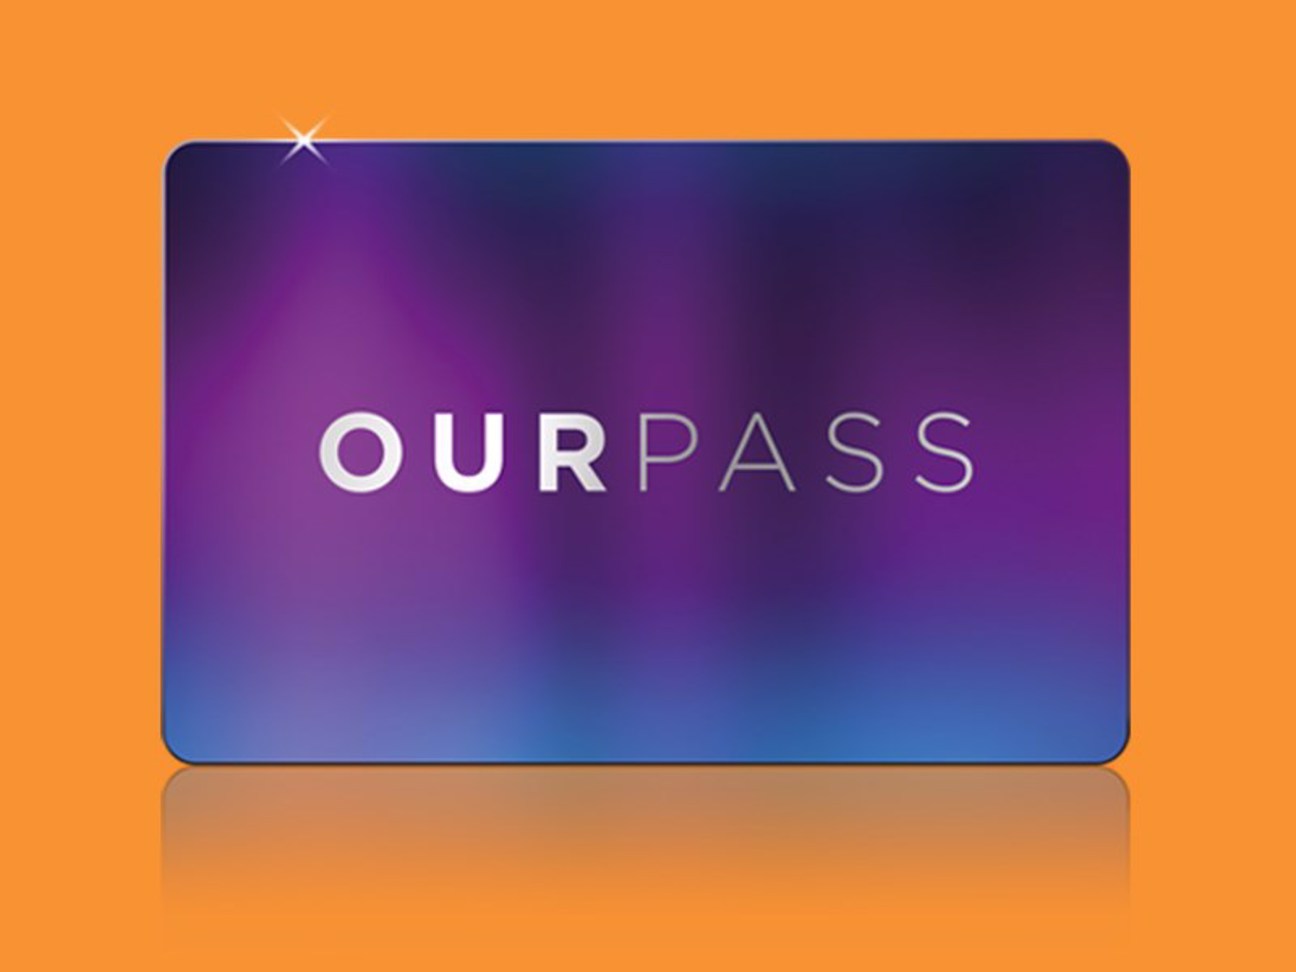 Our Pass